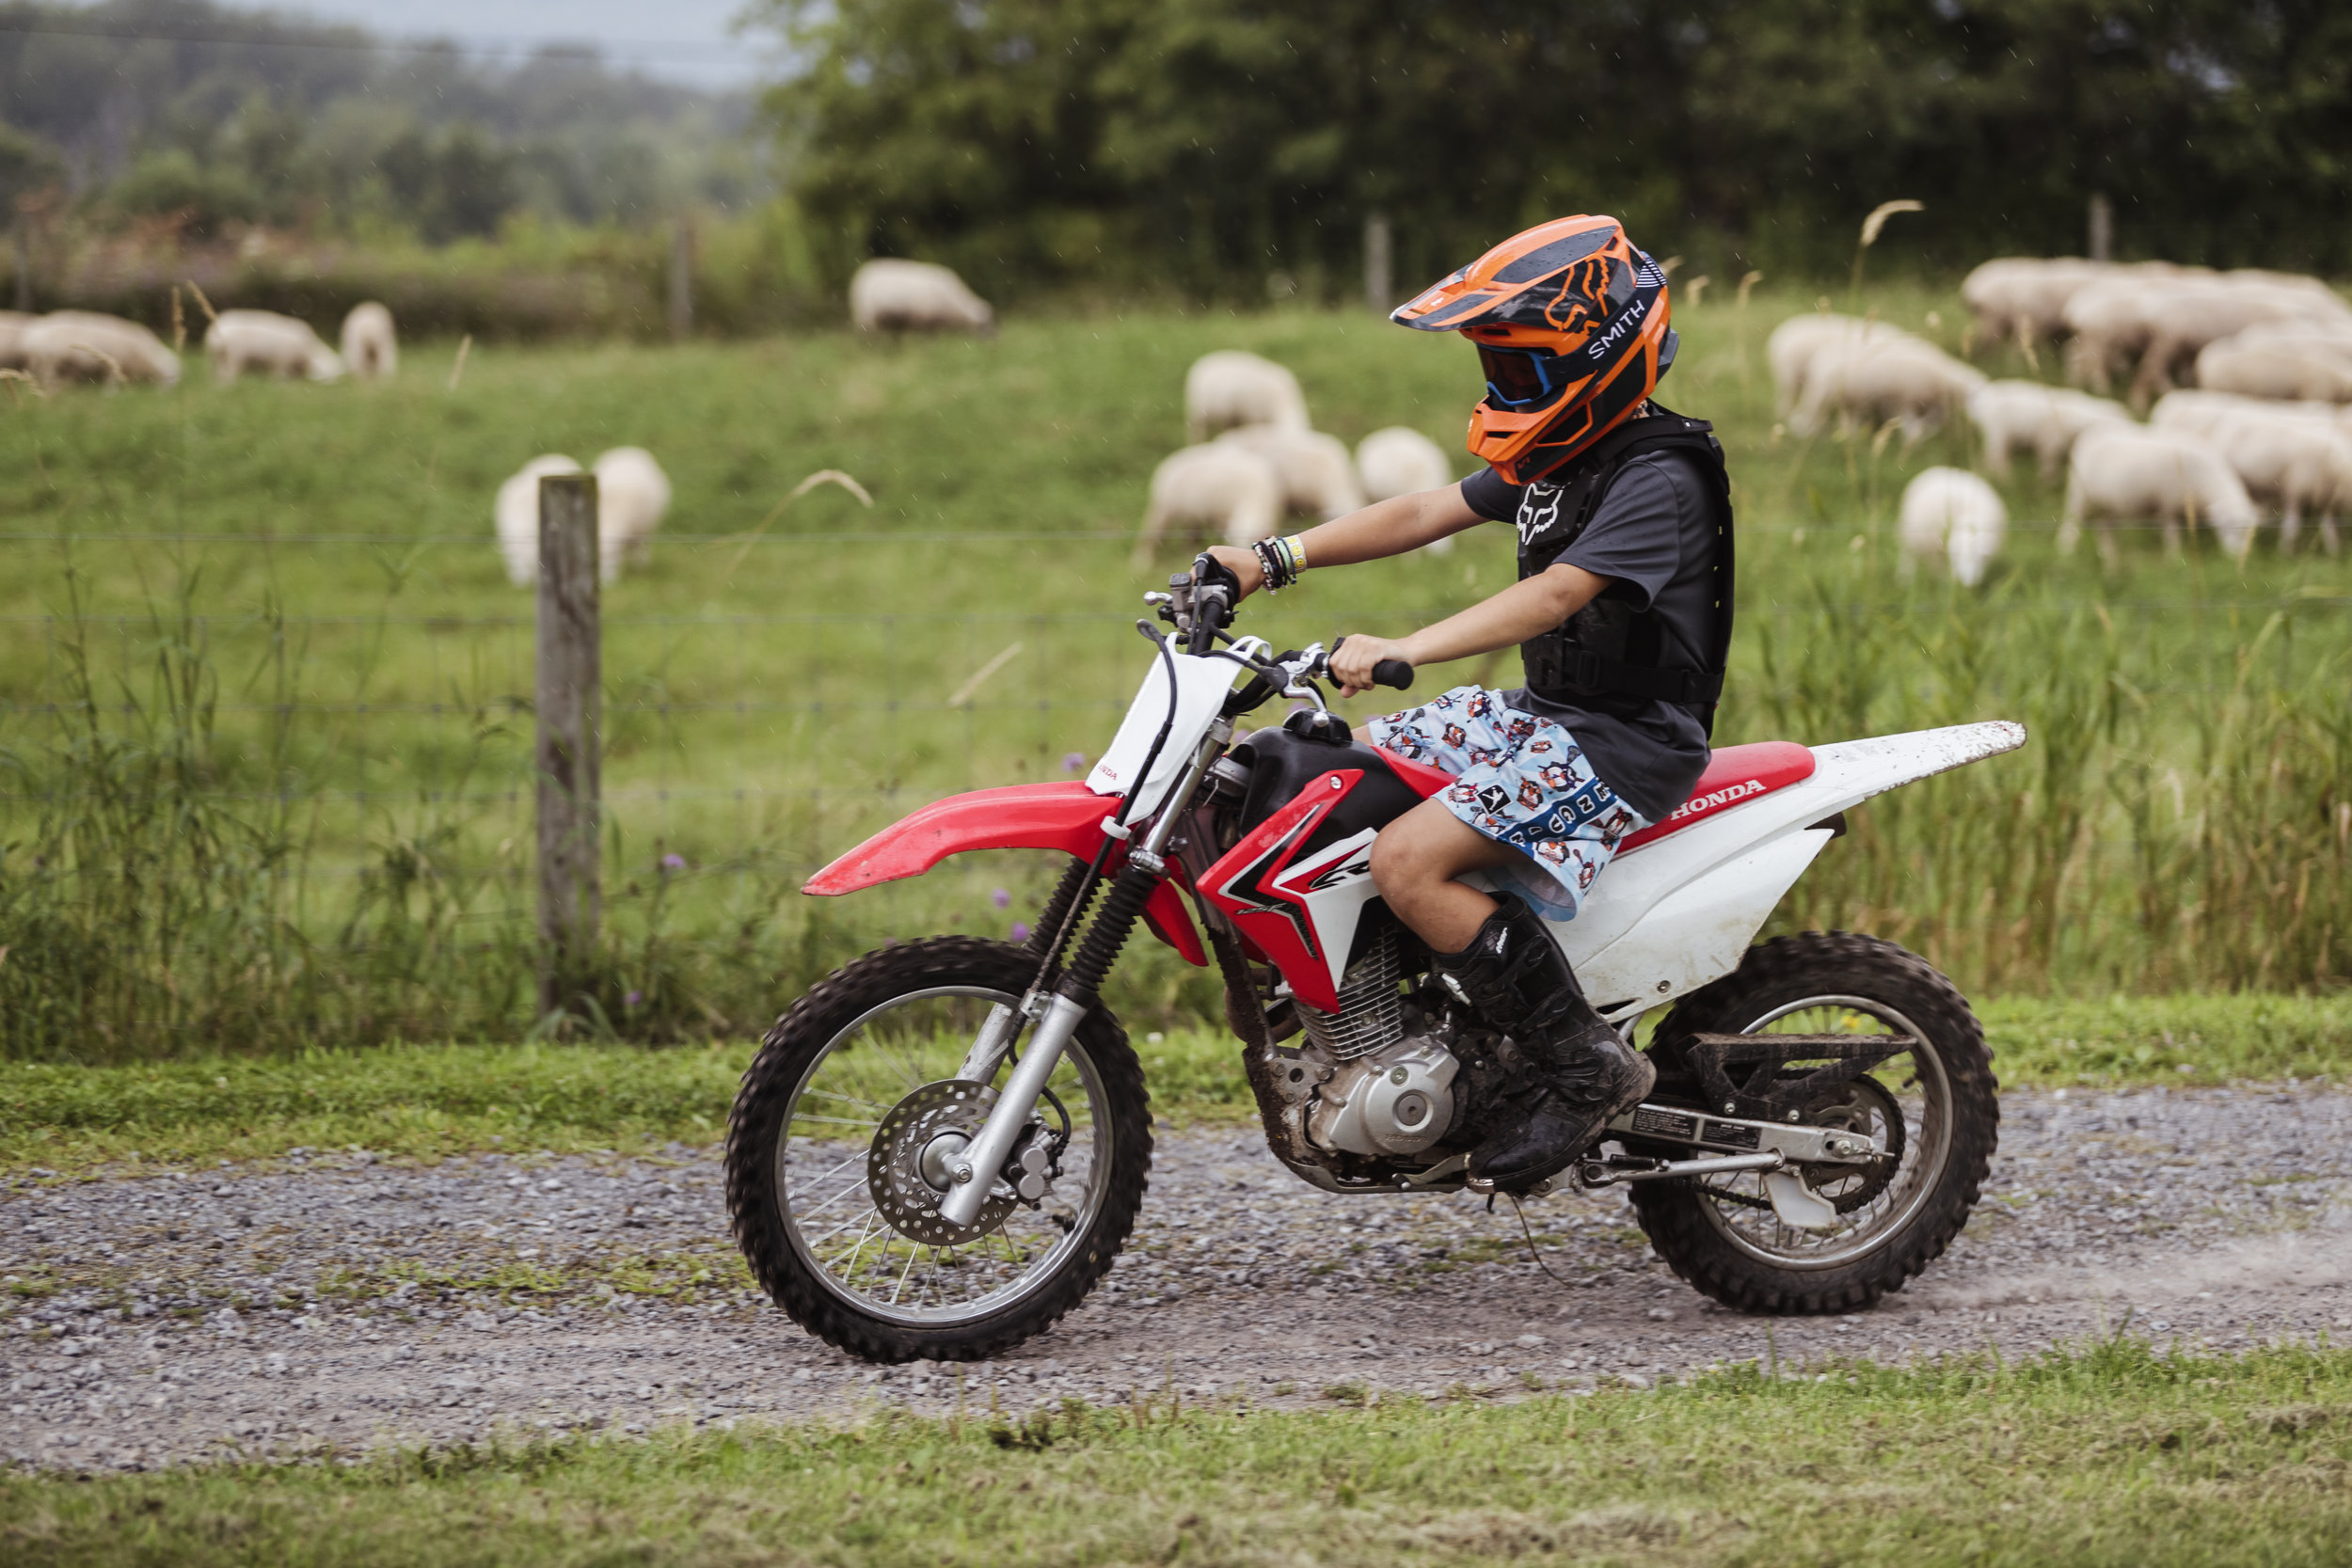 John is thankful for what their family's farming lifestyle provides for himself, his wife, and his children. Here is his son J.J. ripping around the farm on his motorbike.